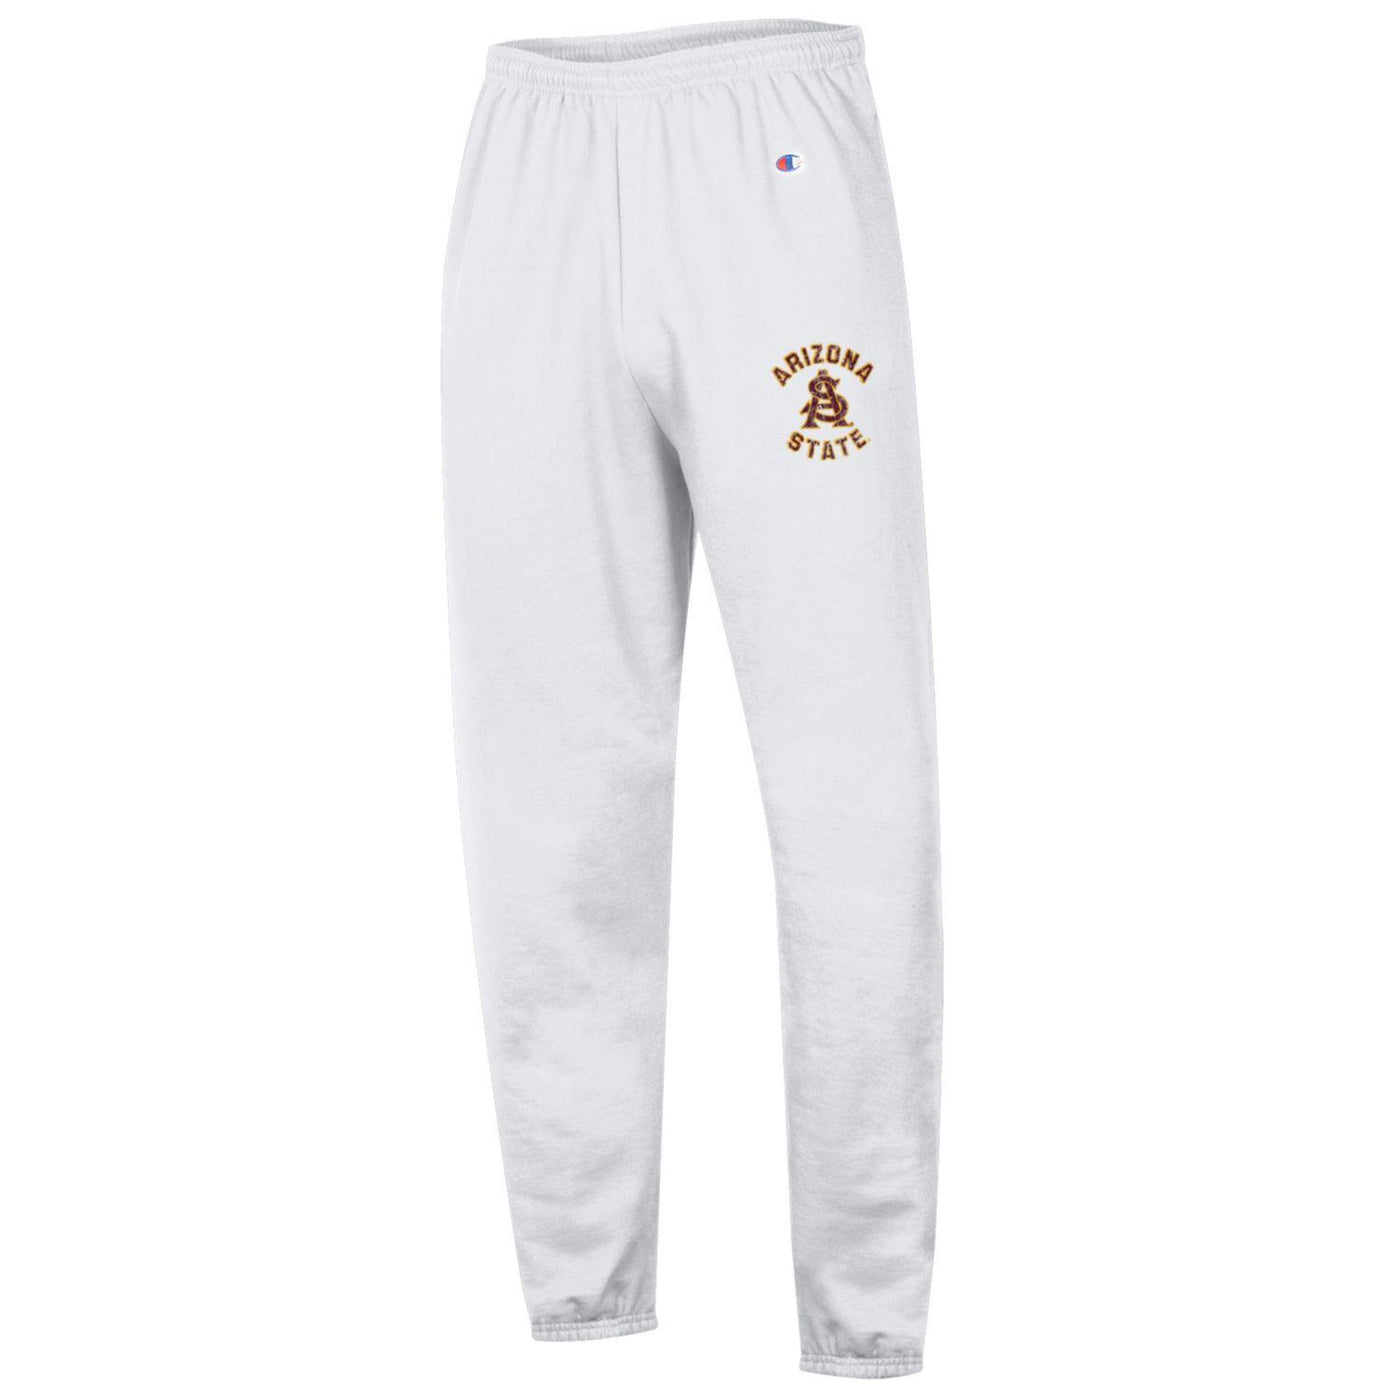 ASU white seat pants with 'Arizona State arched over an interlocking 'A' and 'S' printed design